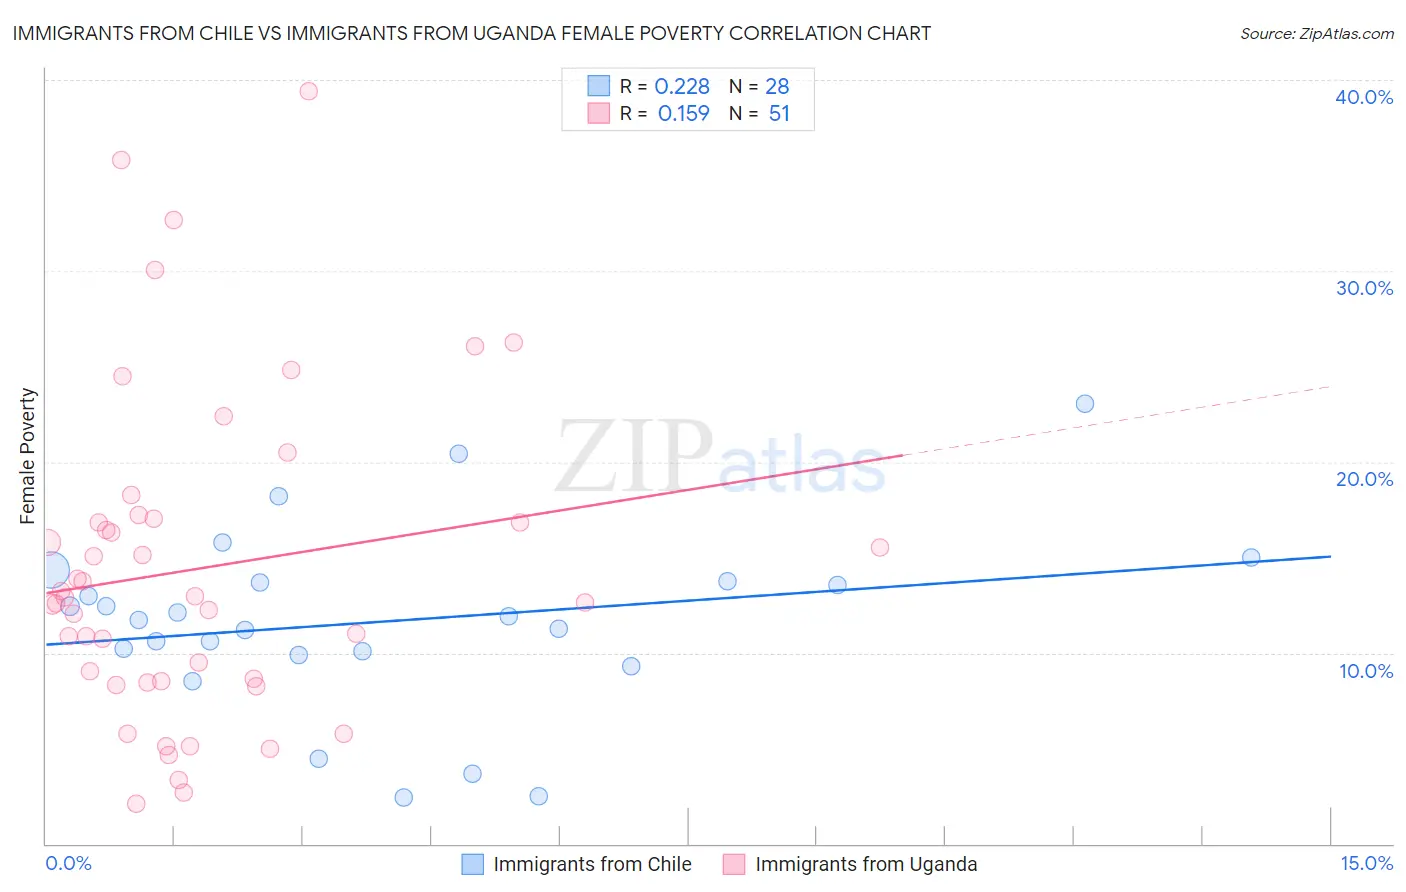 Immigrants from Chile vs Immigrants from Uganda Female Poverty